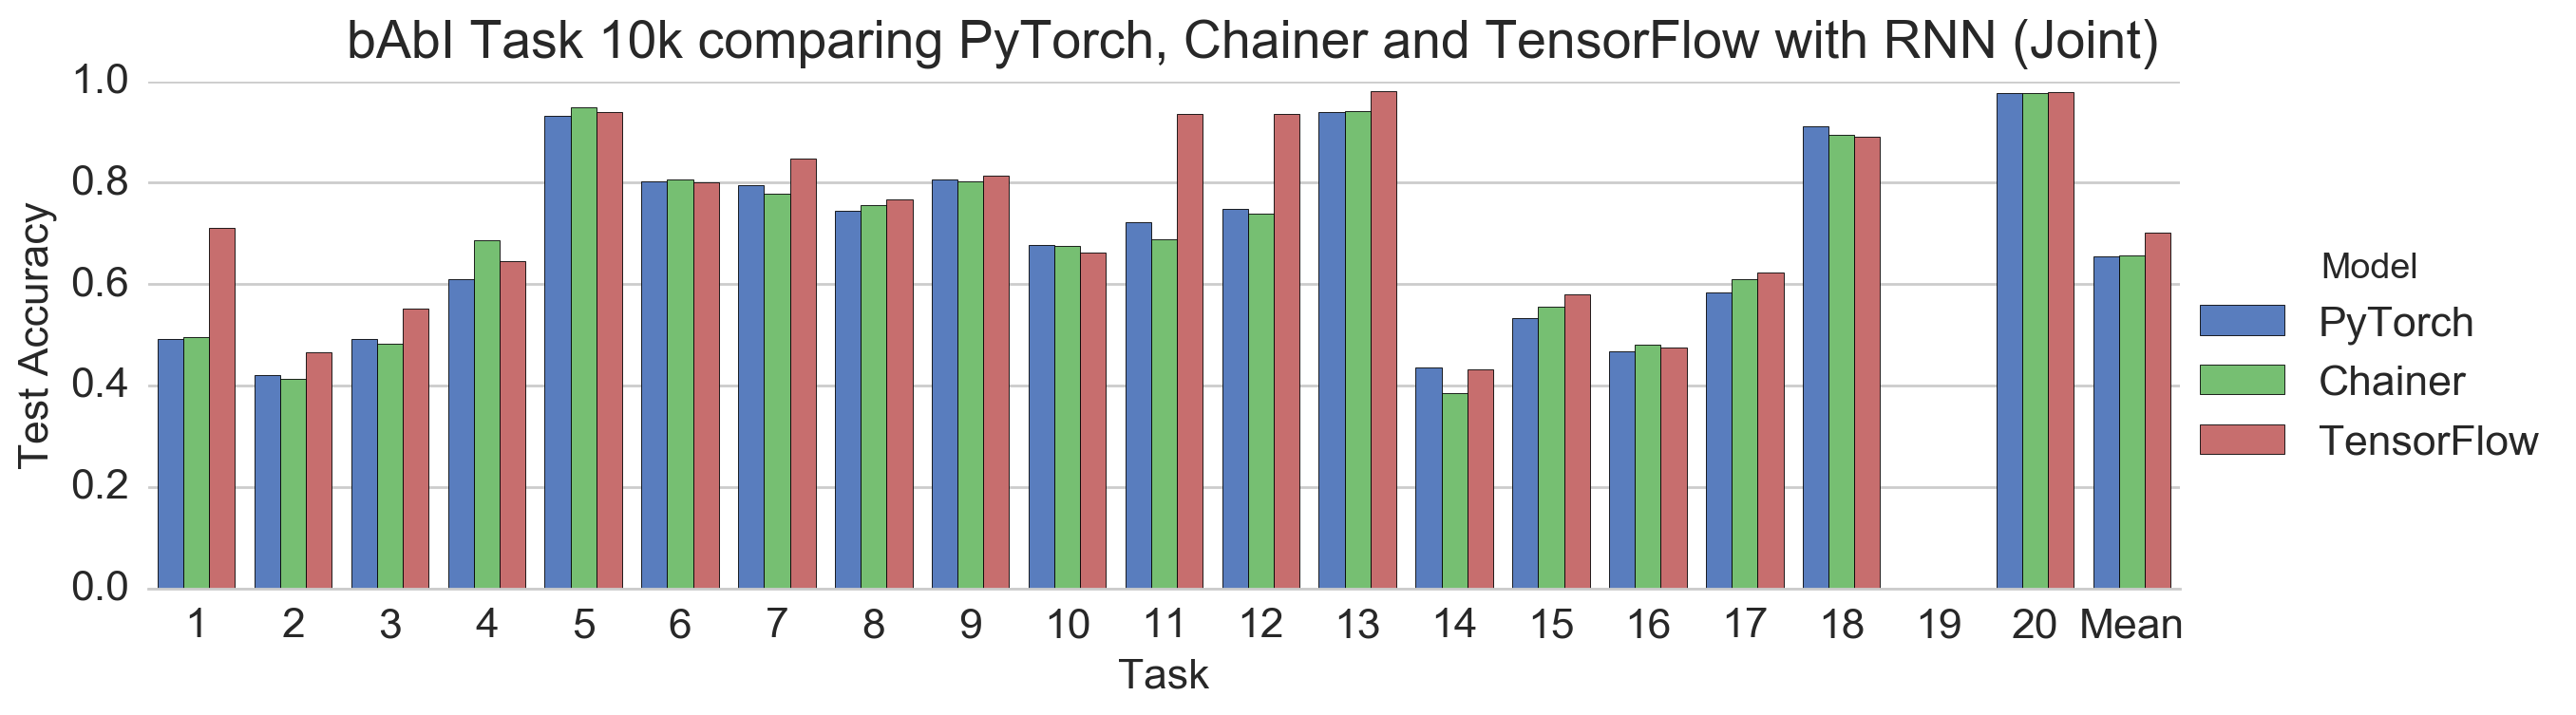 bAbI Task 10k comparing PyTorch, Chainer and TensorFlow with RNN (Joint)